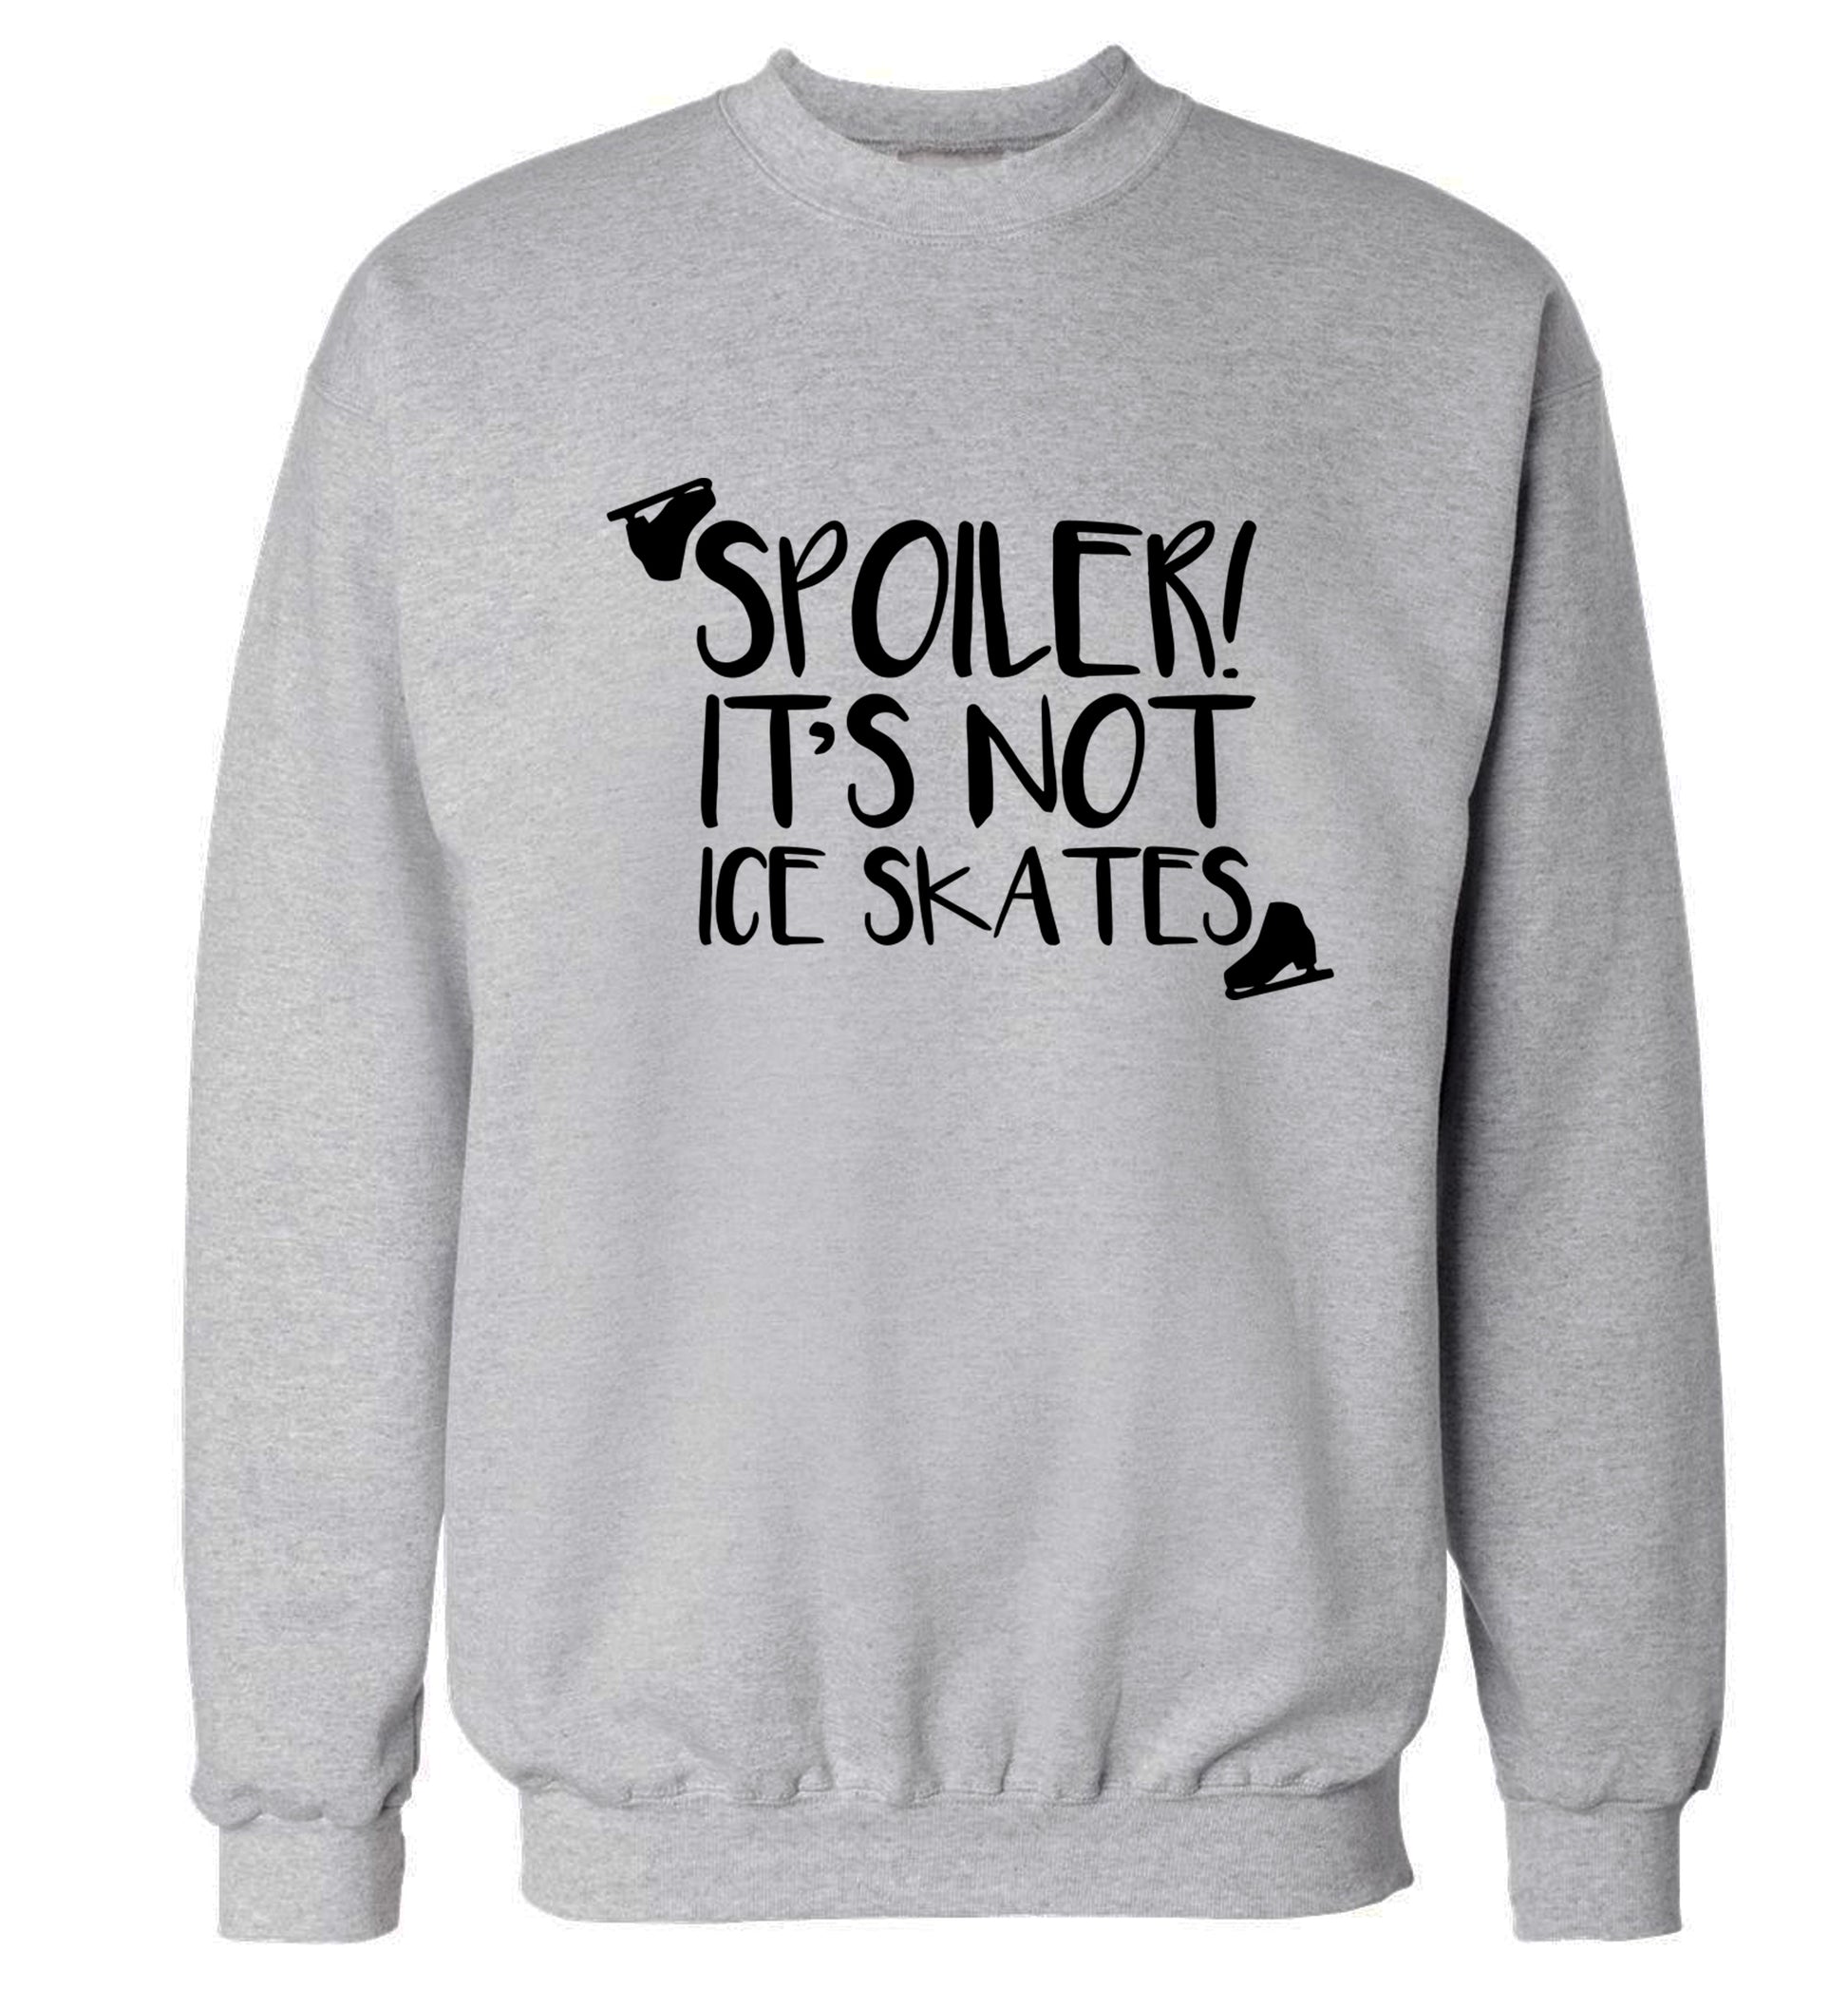 Spoiler it's Not a Pair of Ice Skates Adult's unisex grey Sweater 2XL